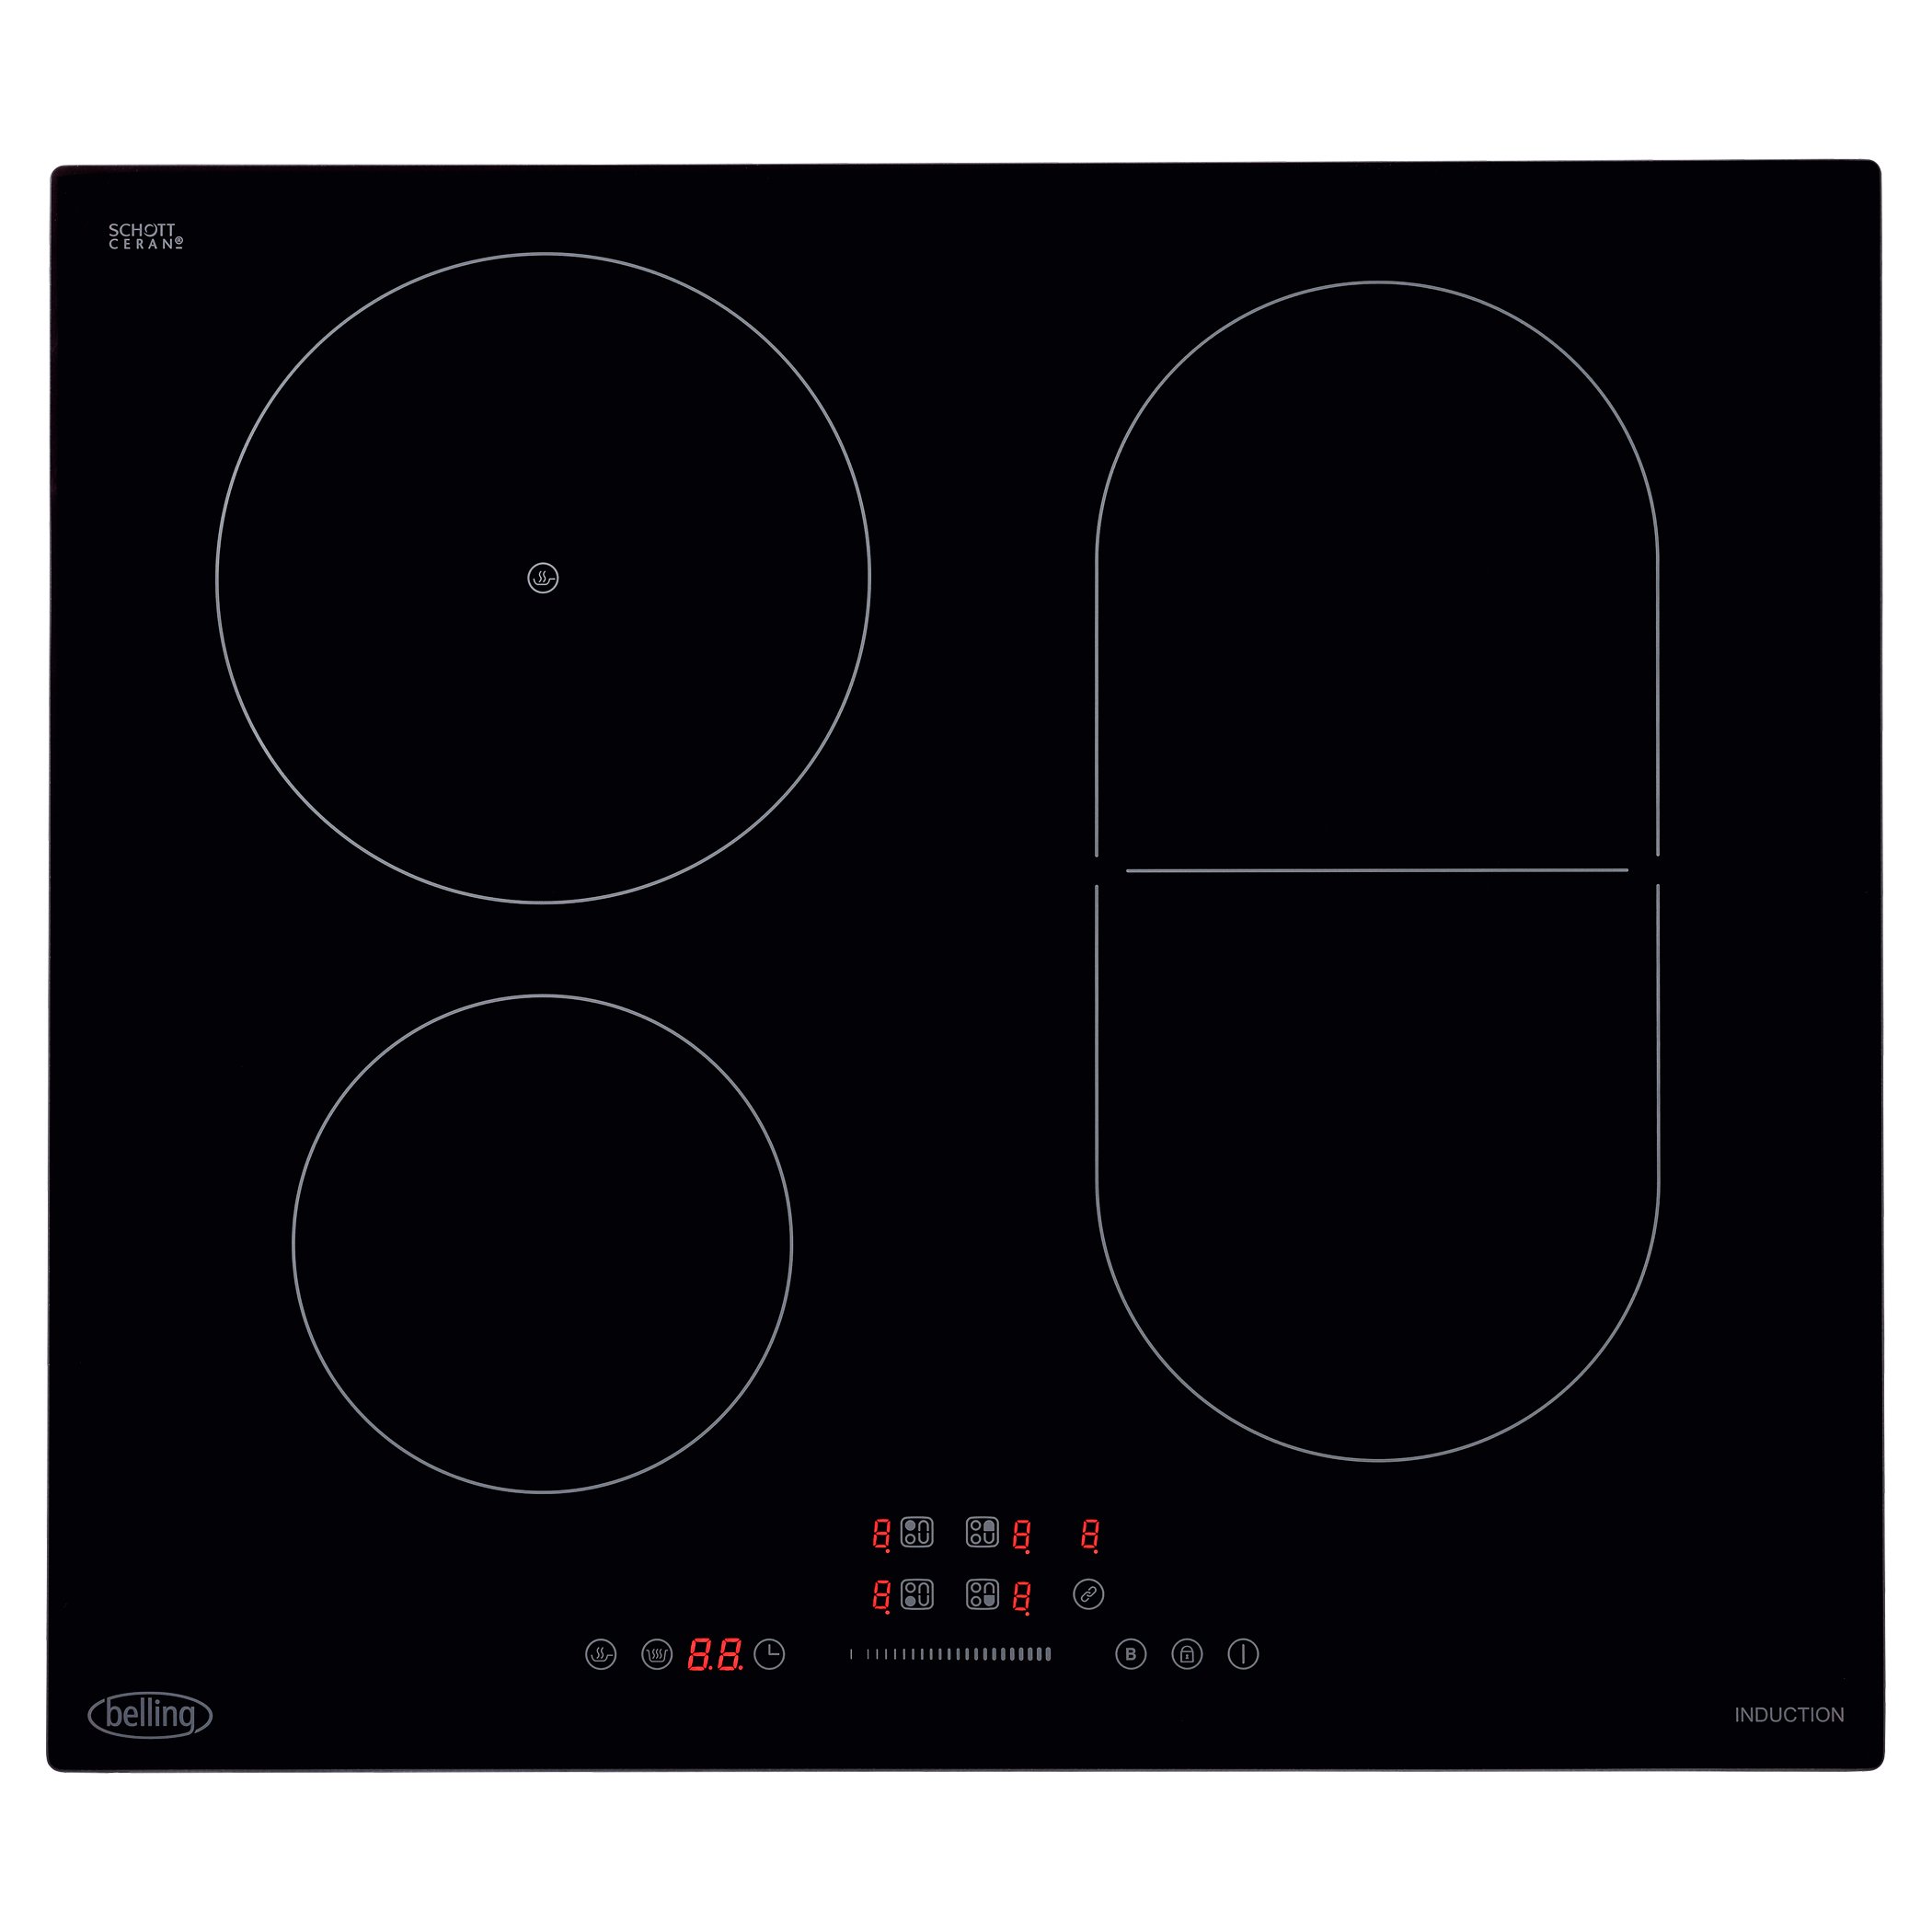 60cm touch control induction hob with a linkable zone. Additional features include power boost, residual heat indicator, child lock and timer.